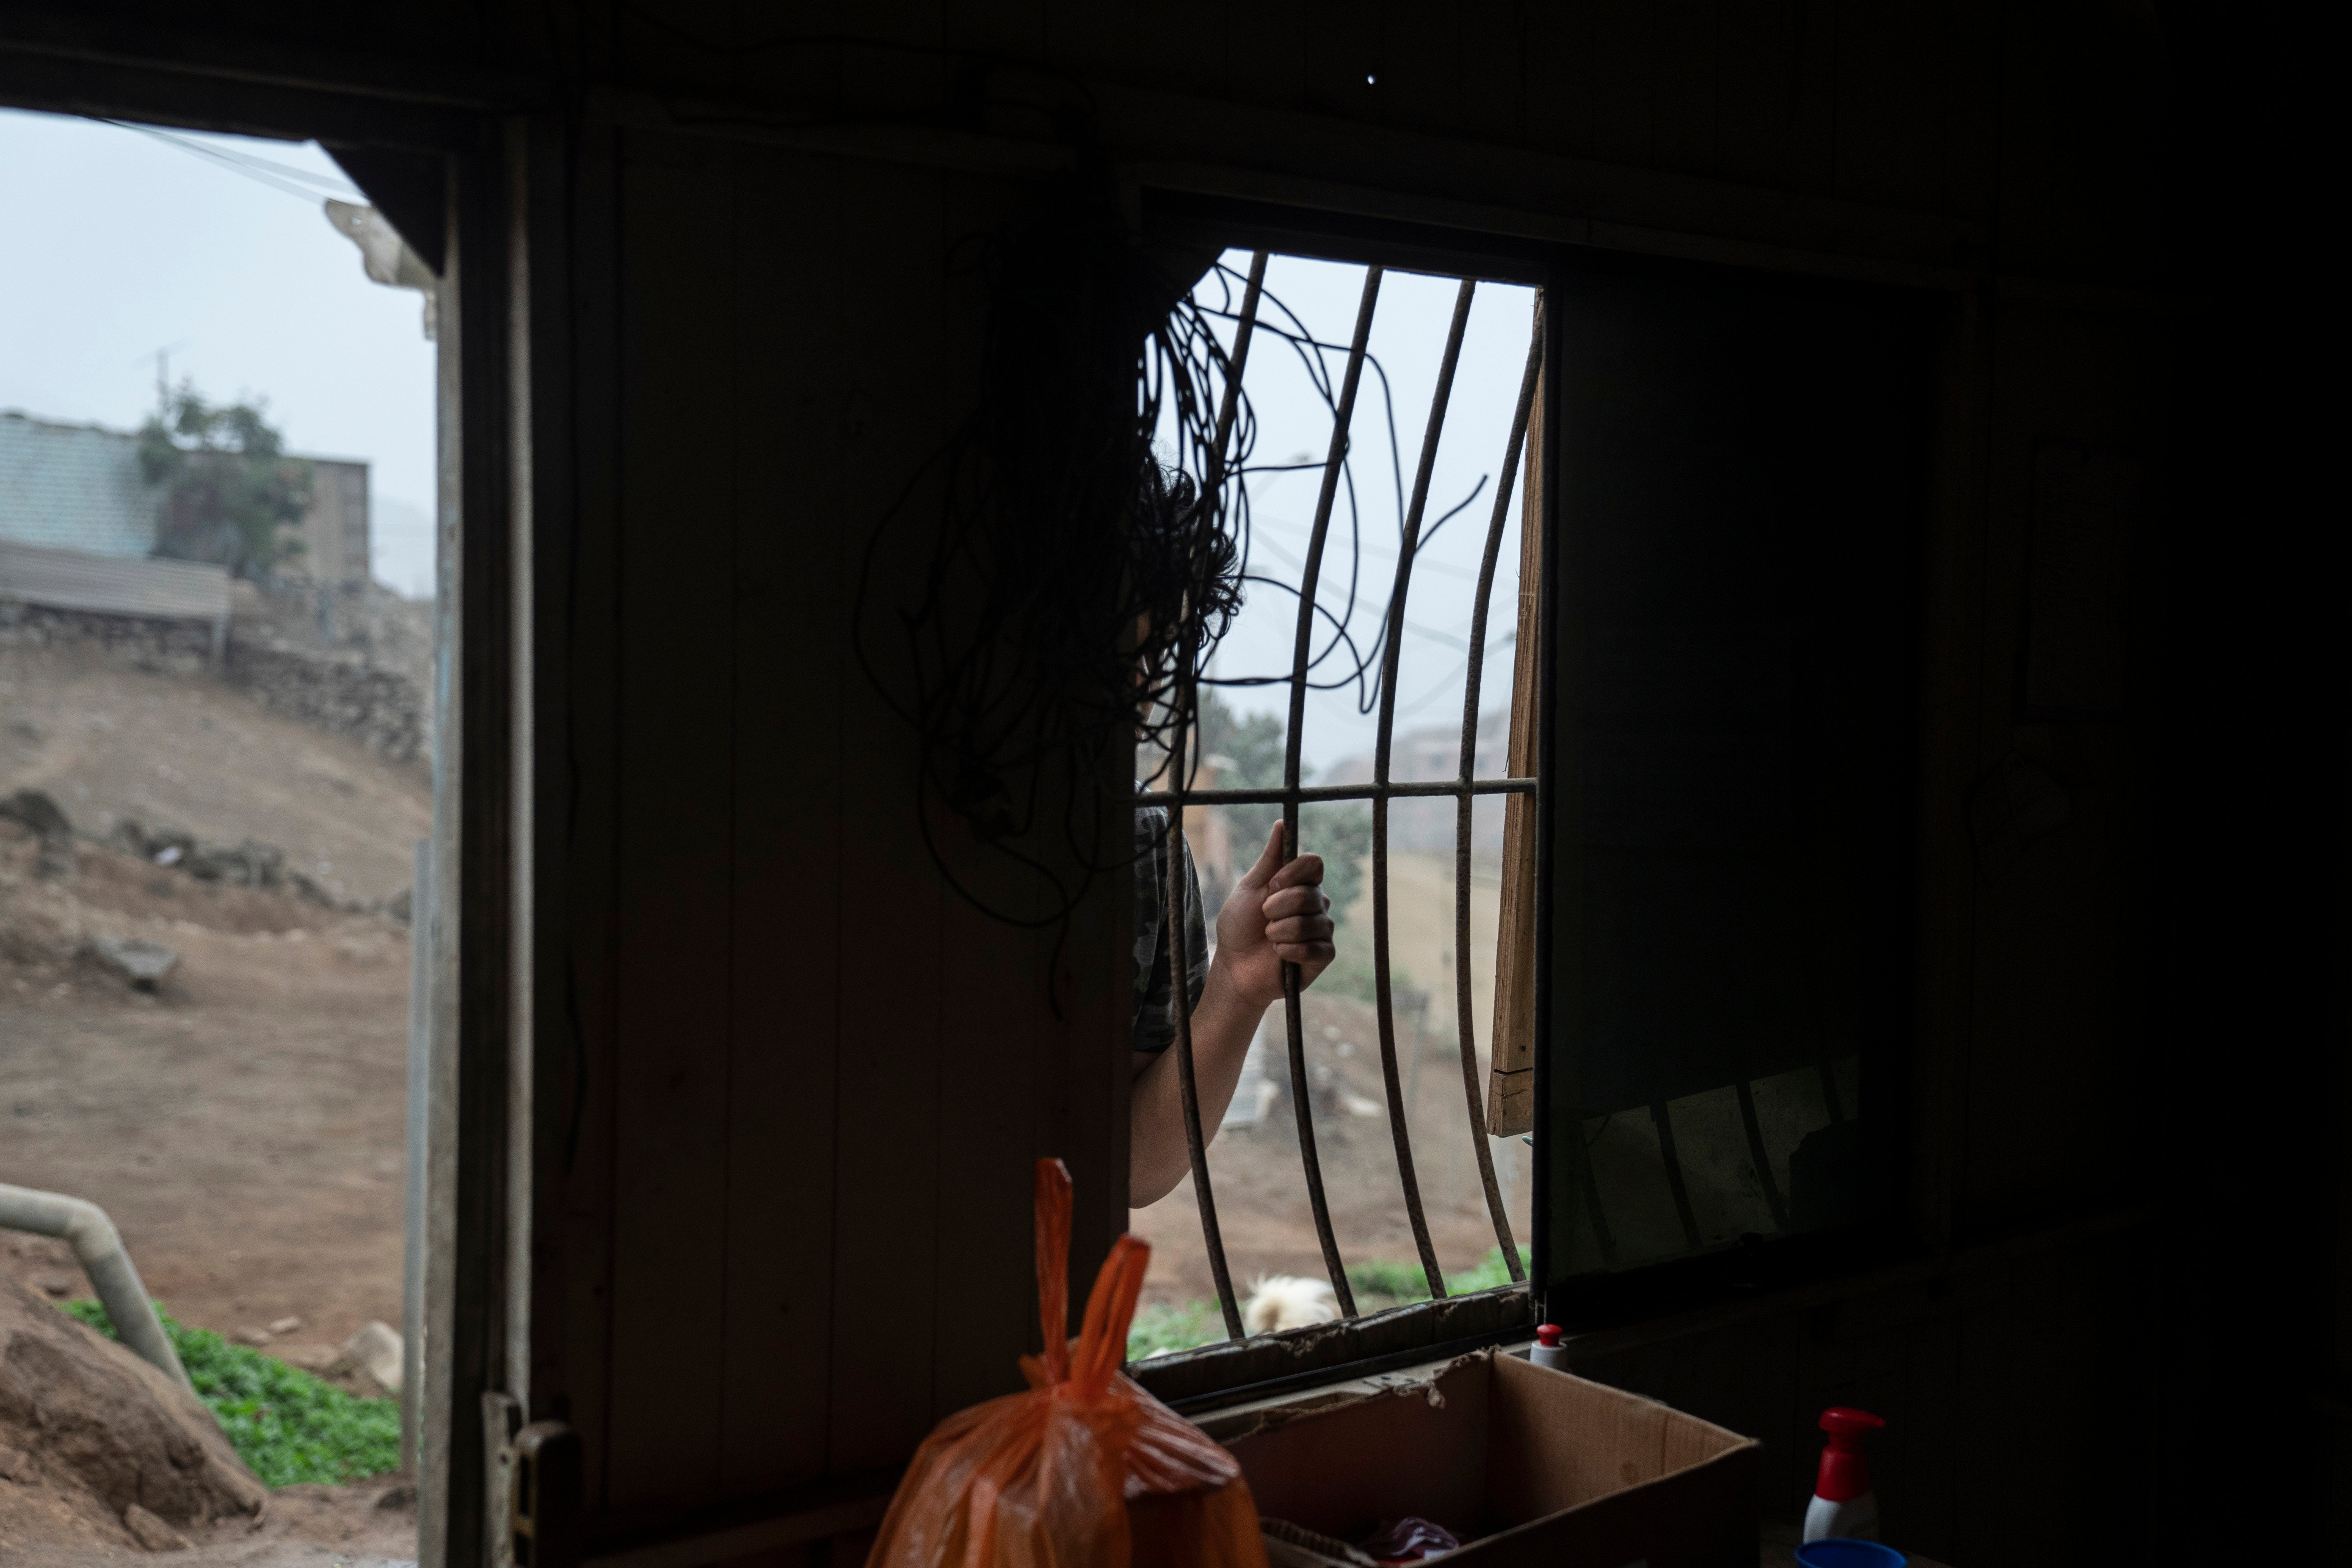 A Peruvian man waits at the window of a communal kitchen in an impoverished neighbourhood in Lima